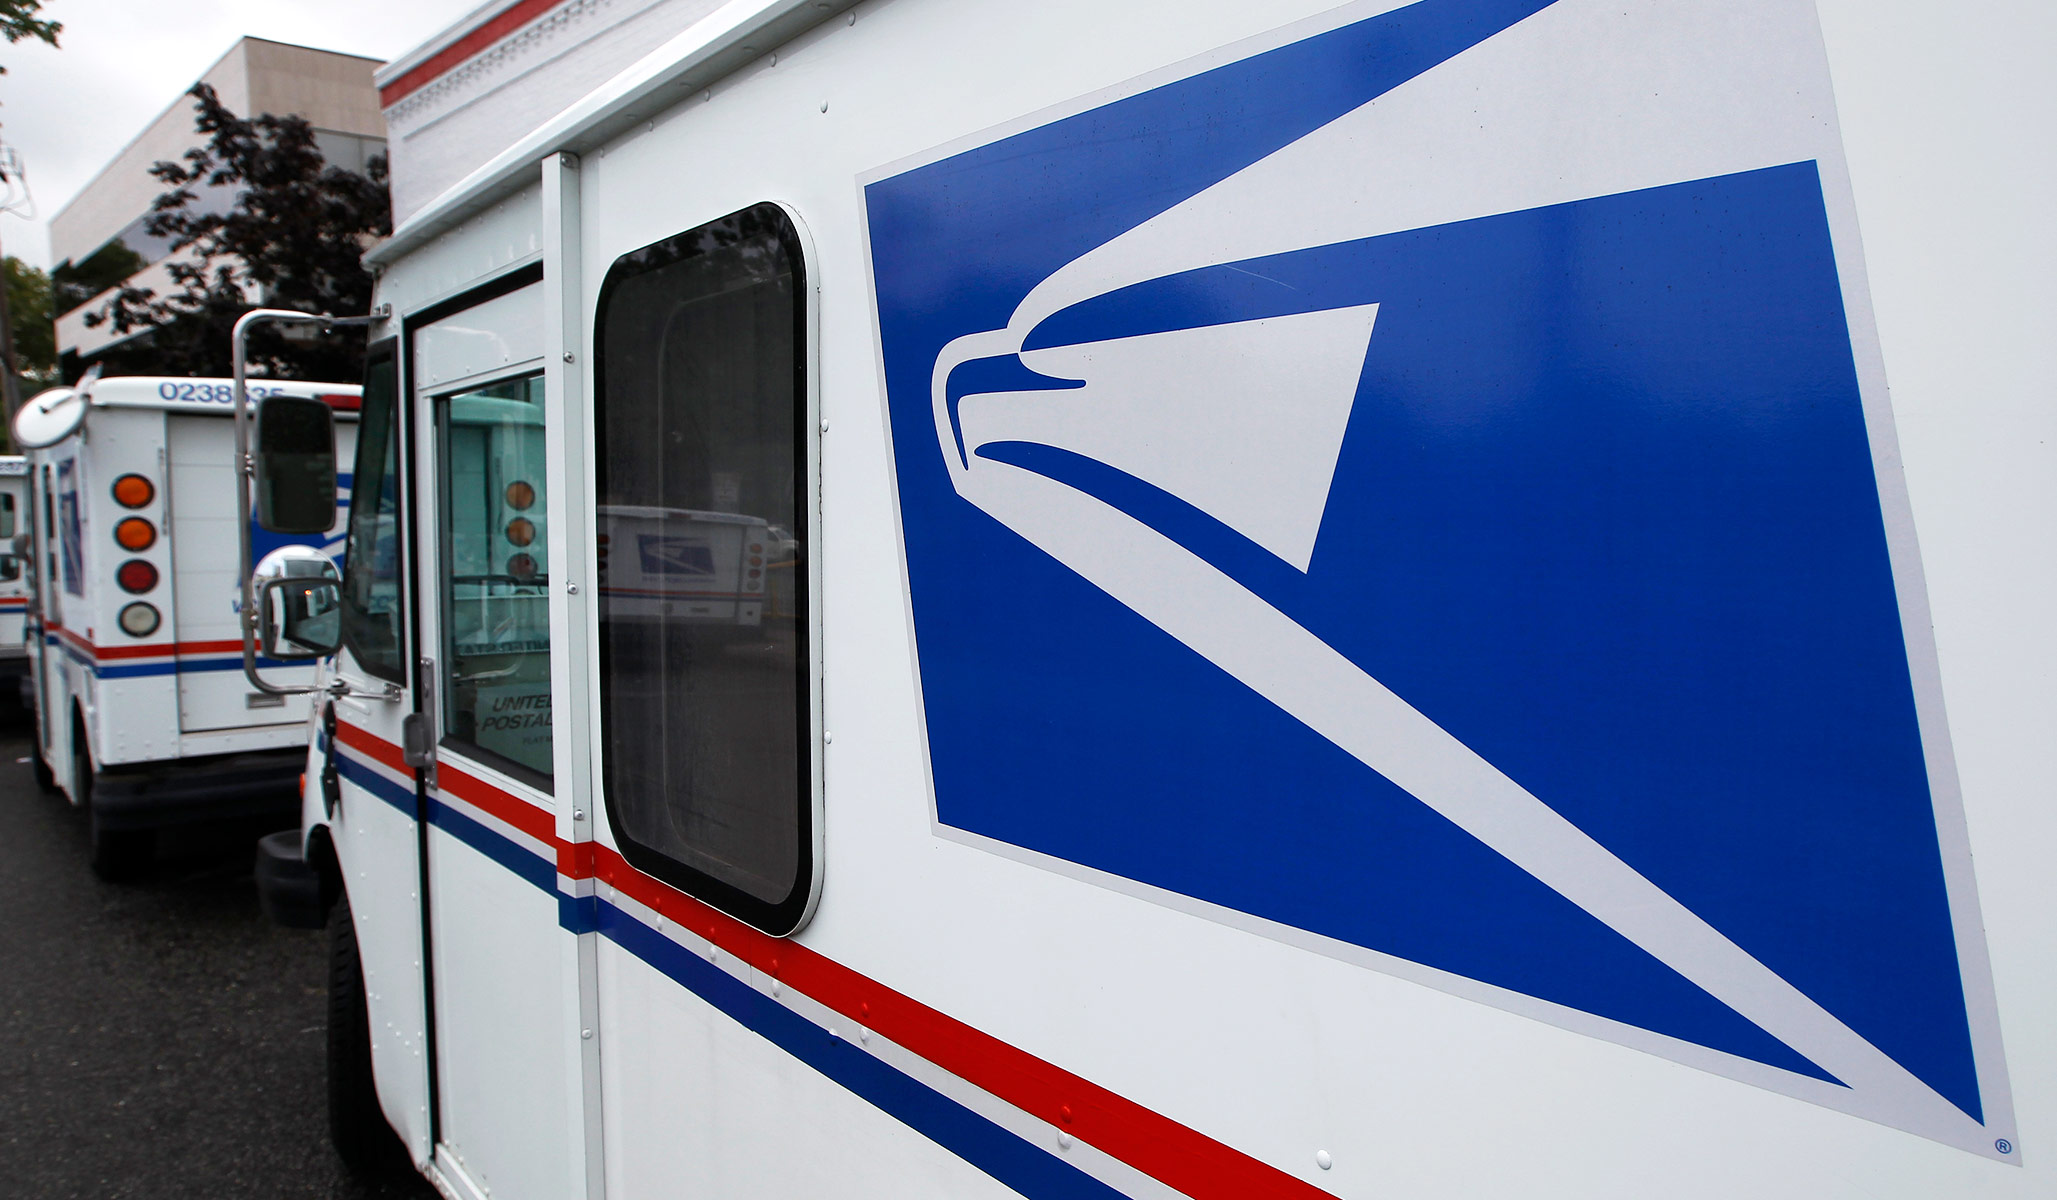 postal delivery vehicles